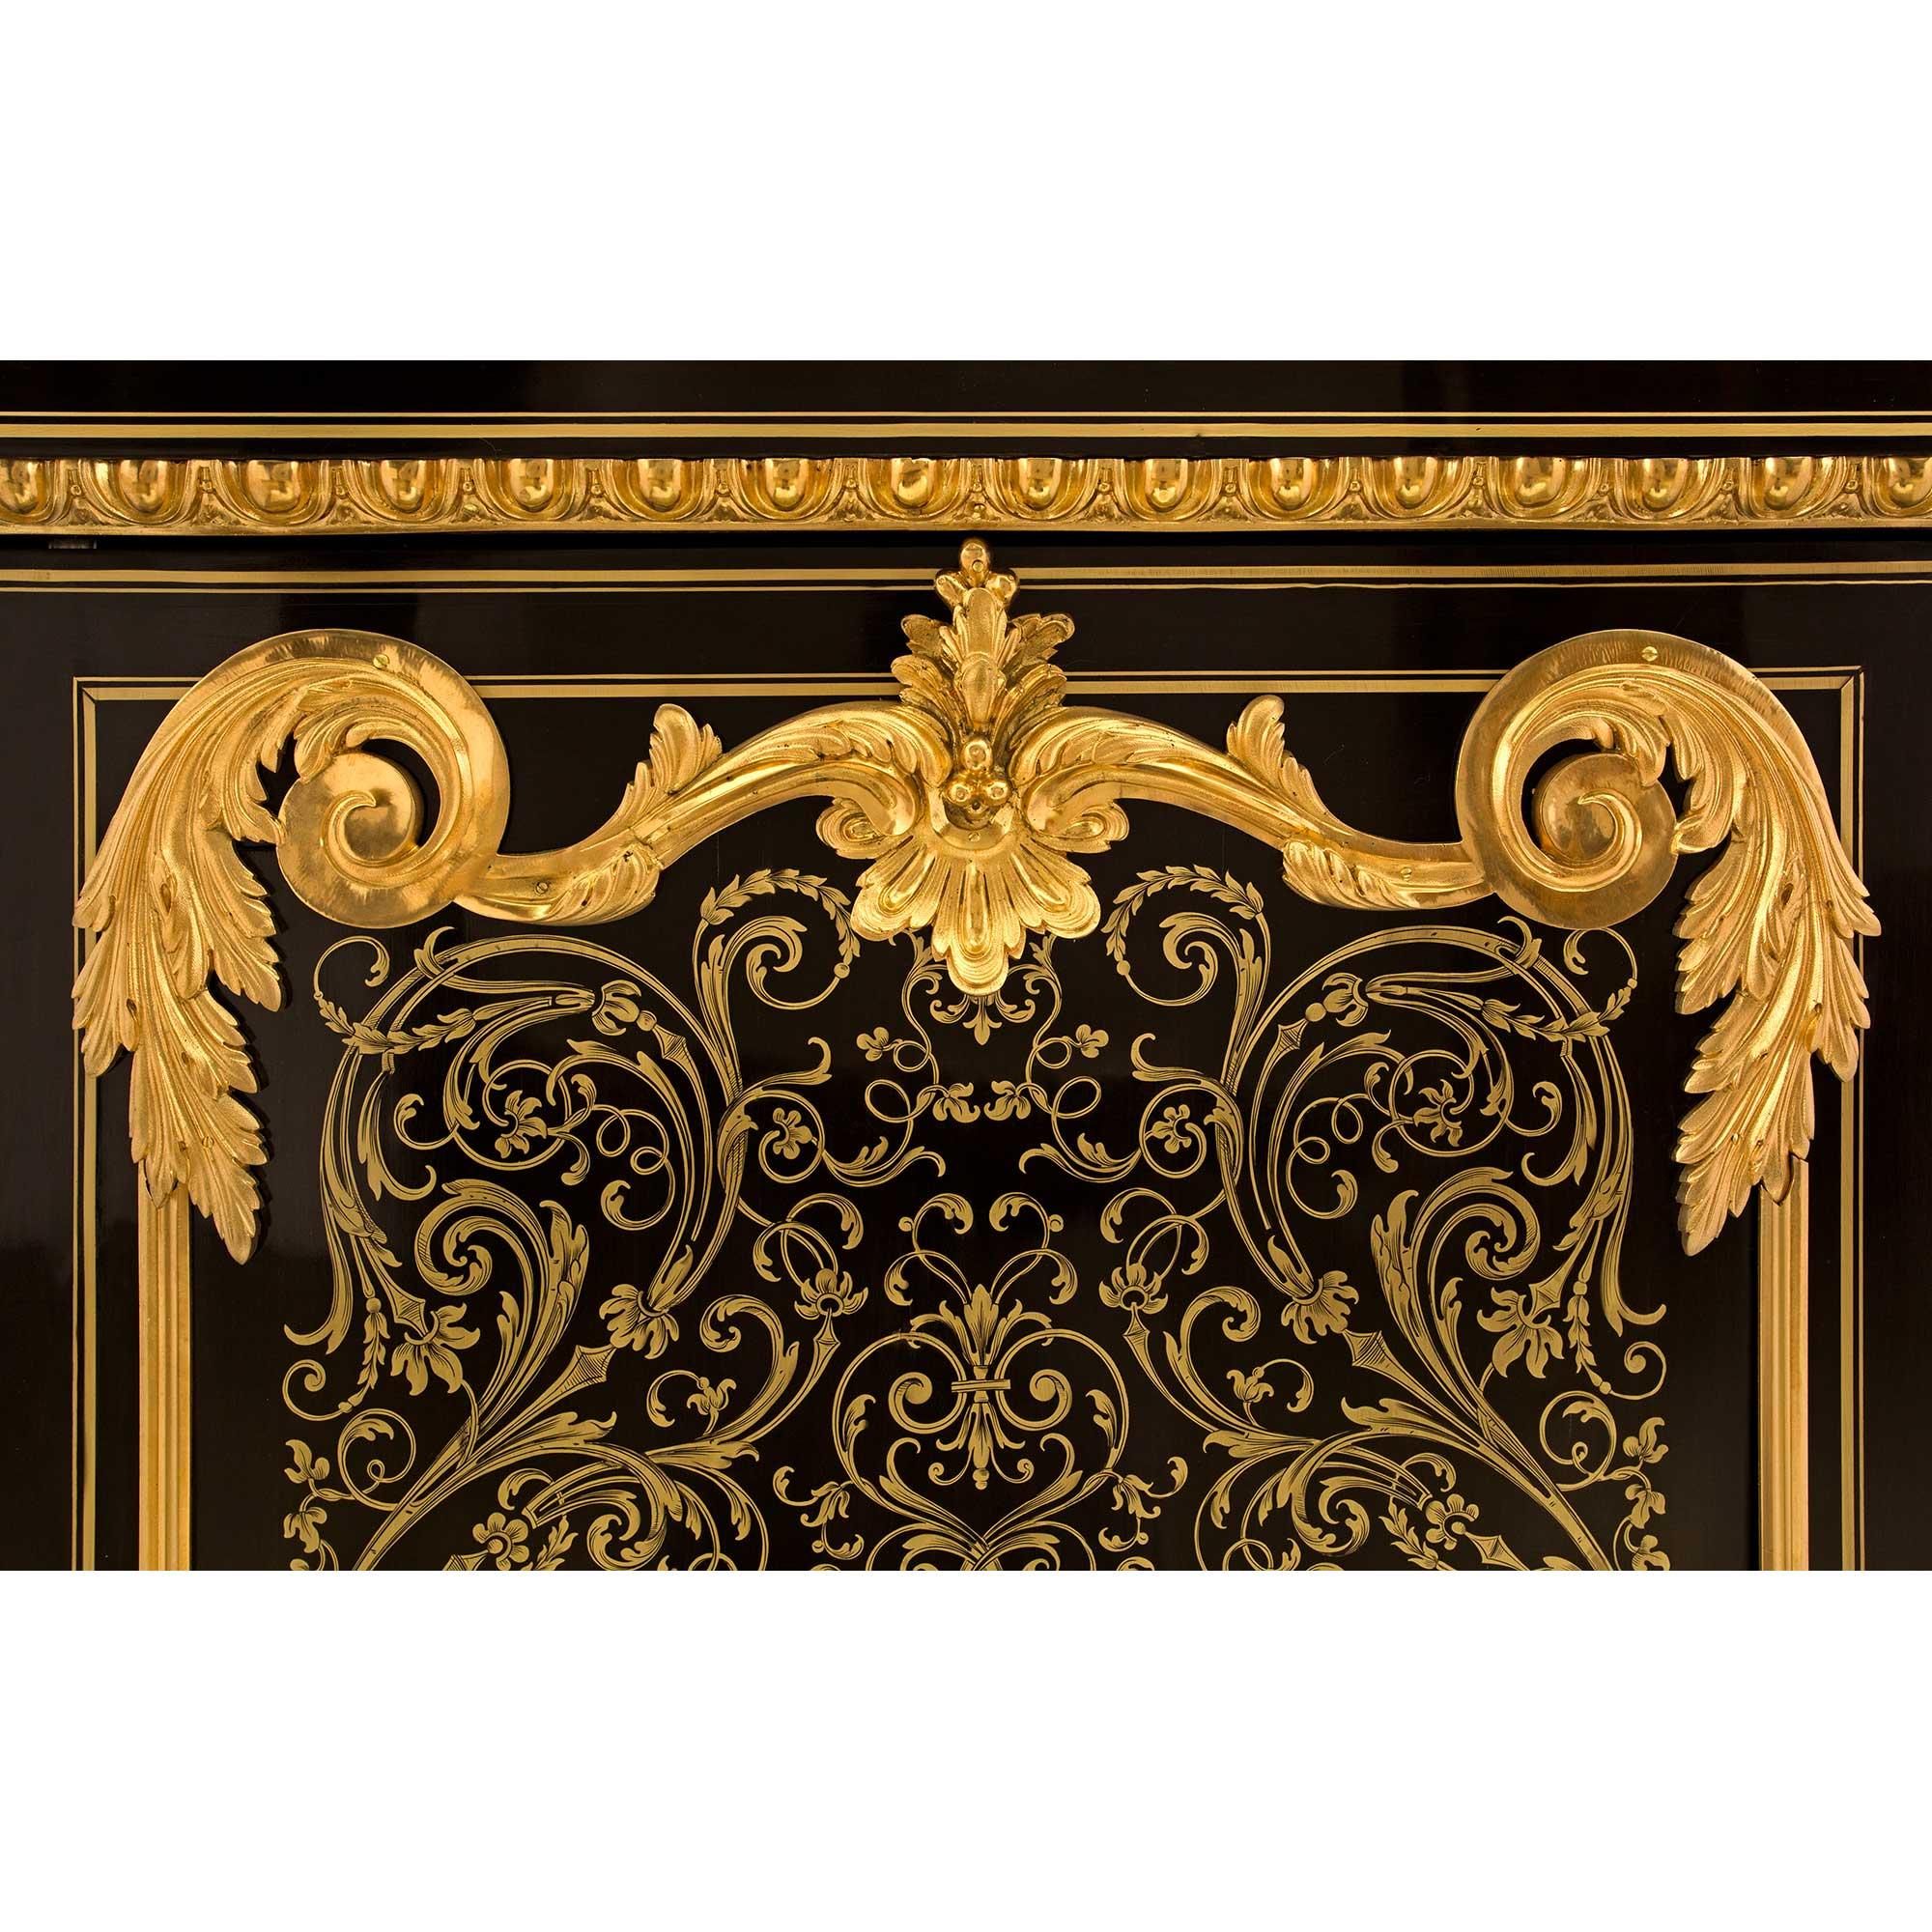 French 19th Century Napoleon III Period Boulle Cabinet À Hauteur D’Appui For Sale 1